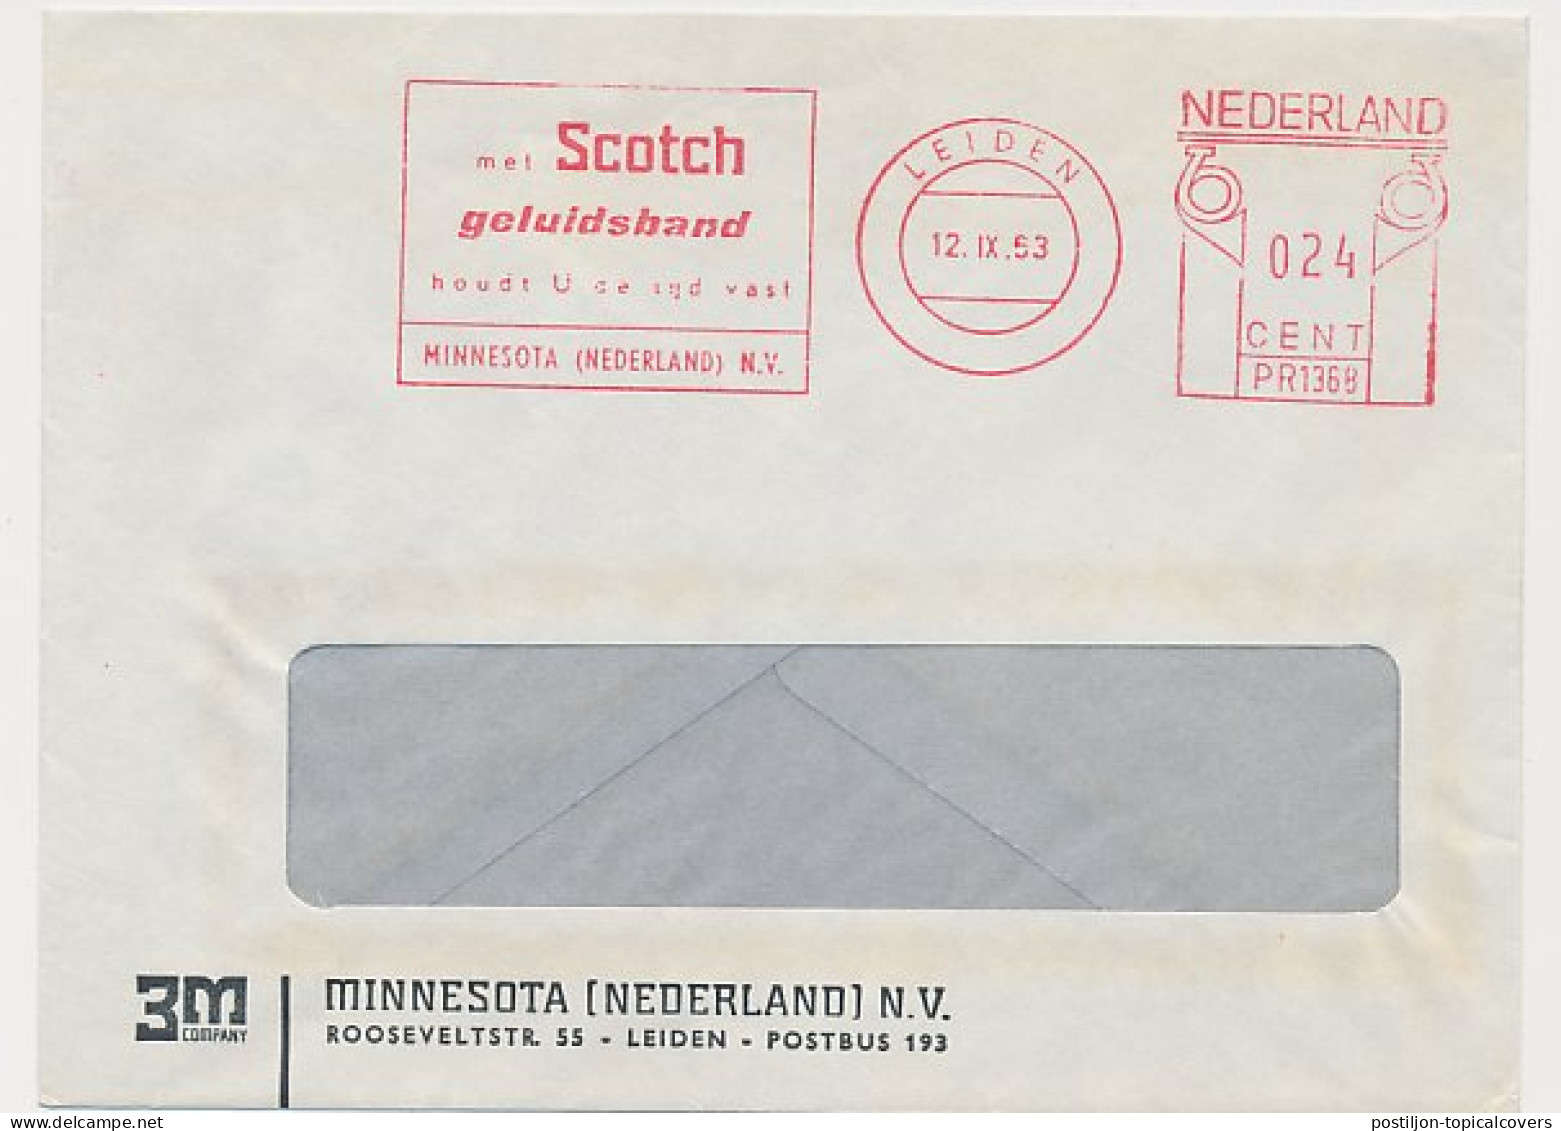 Meter Cover Netherlands 1963 Audio Tape - Magnetic Tape - Scotch - Leiden - Musik